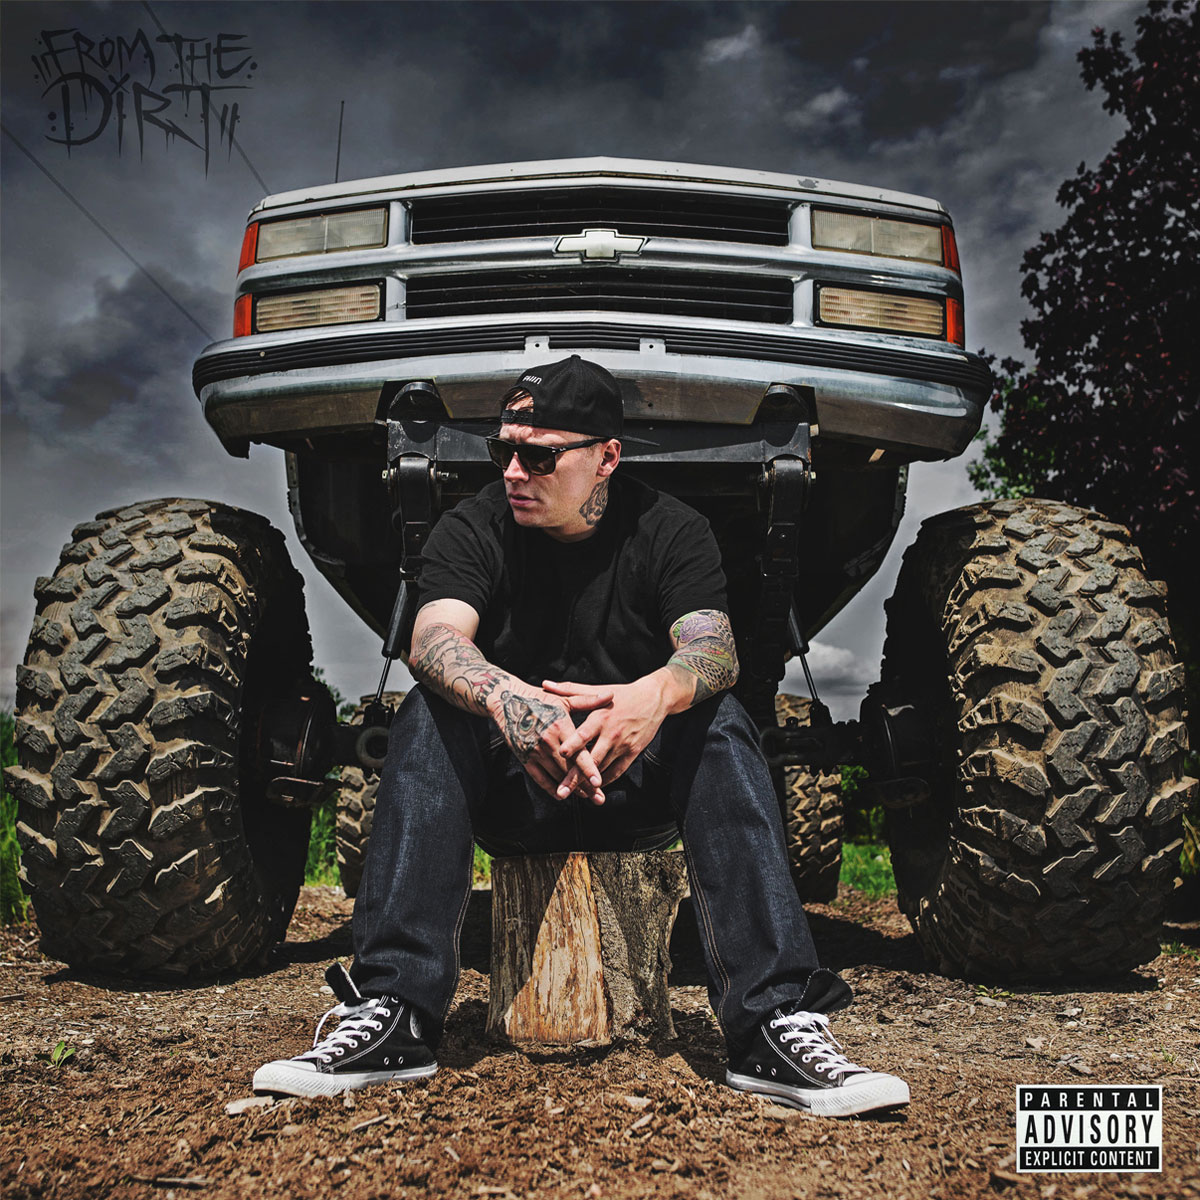 Snak The Ripper – From the Dirt